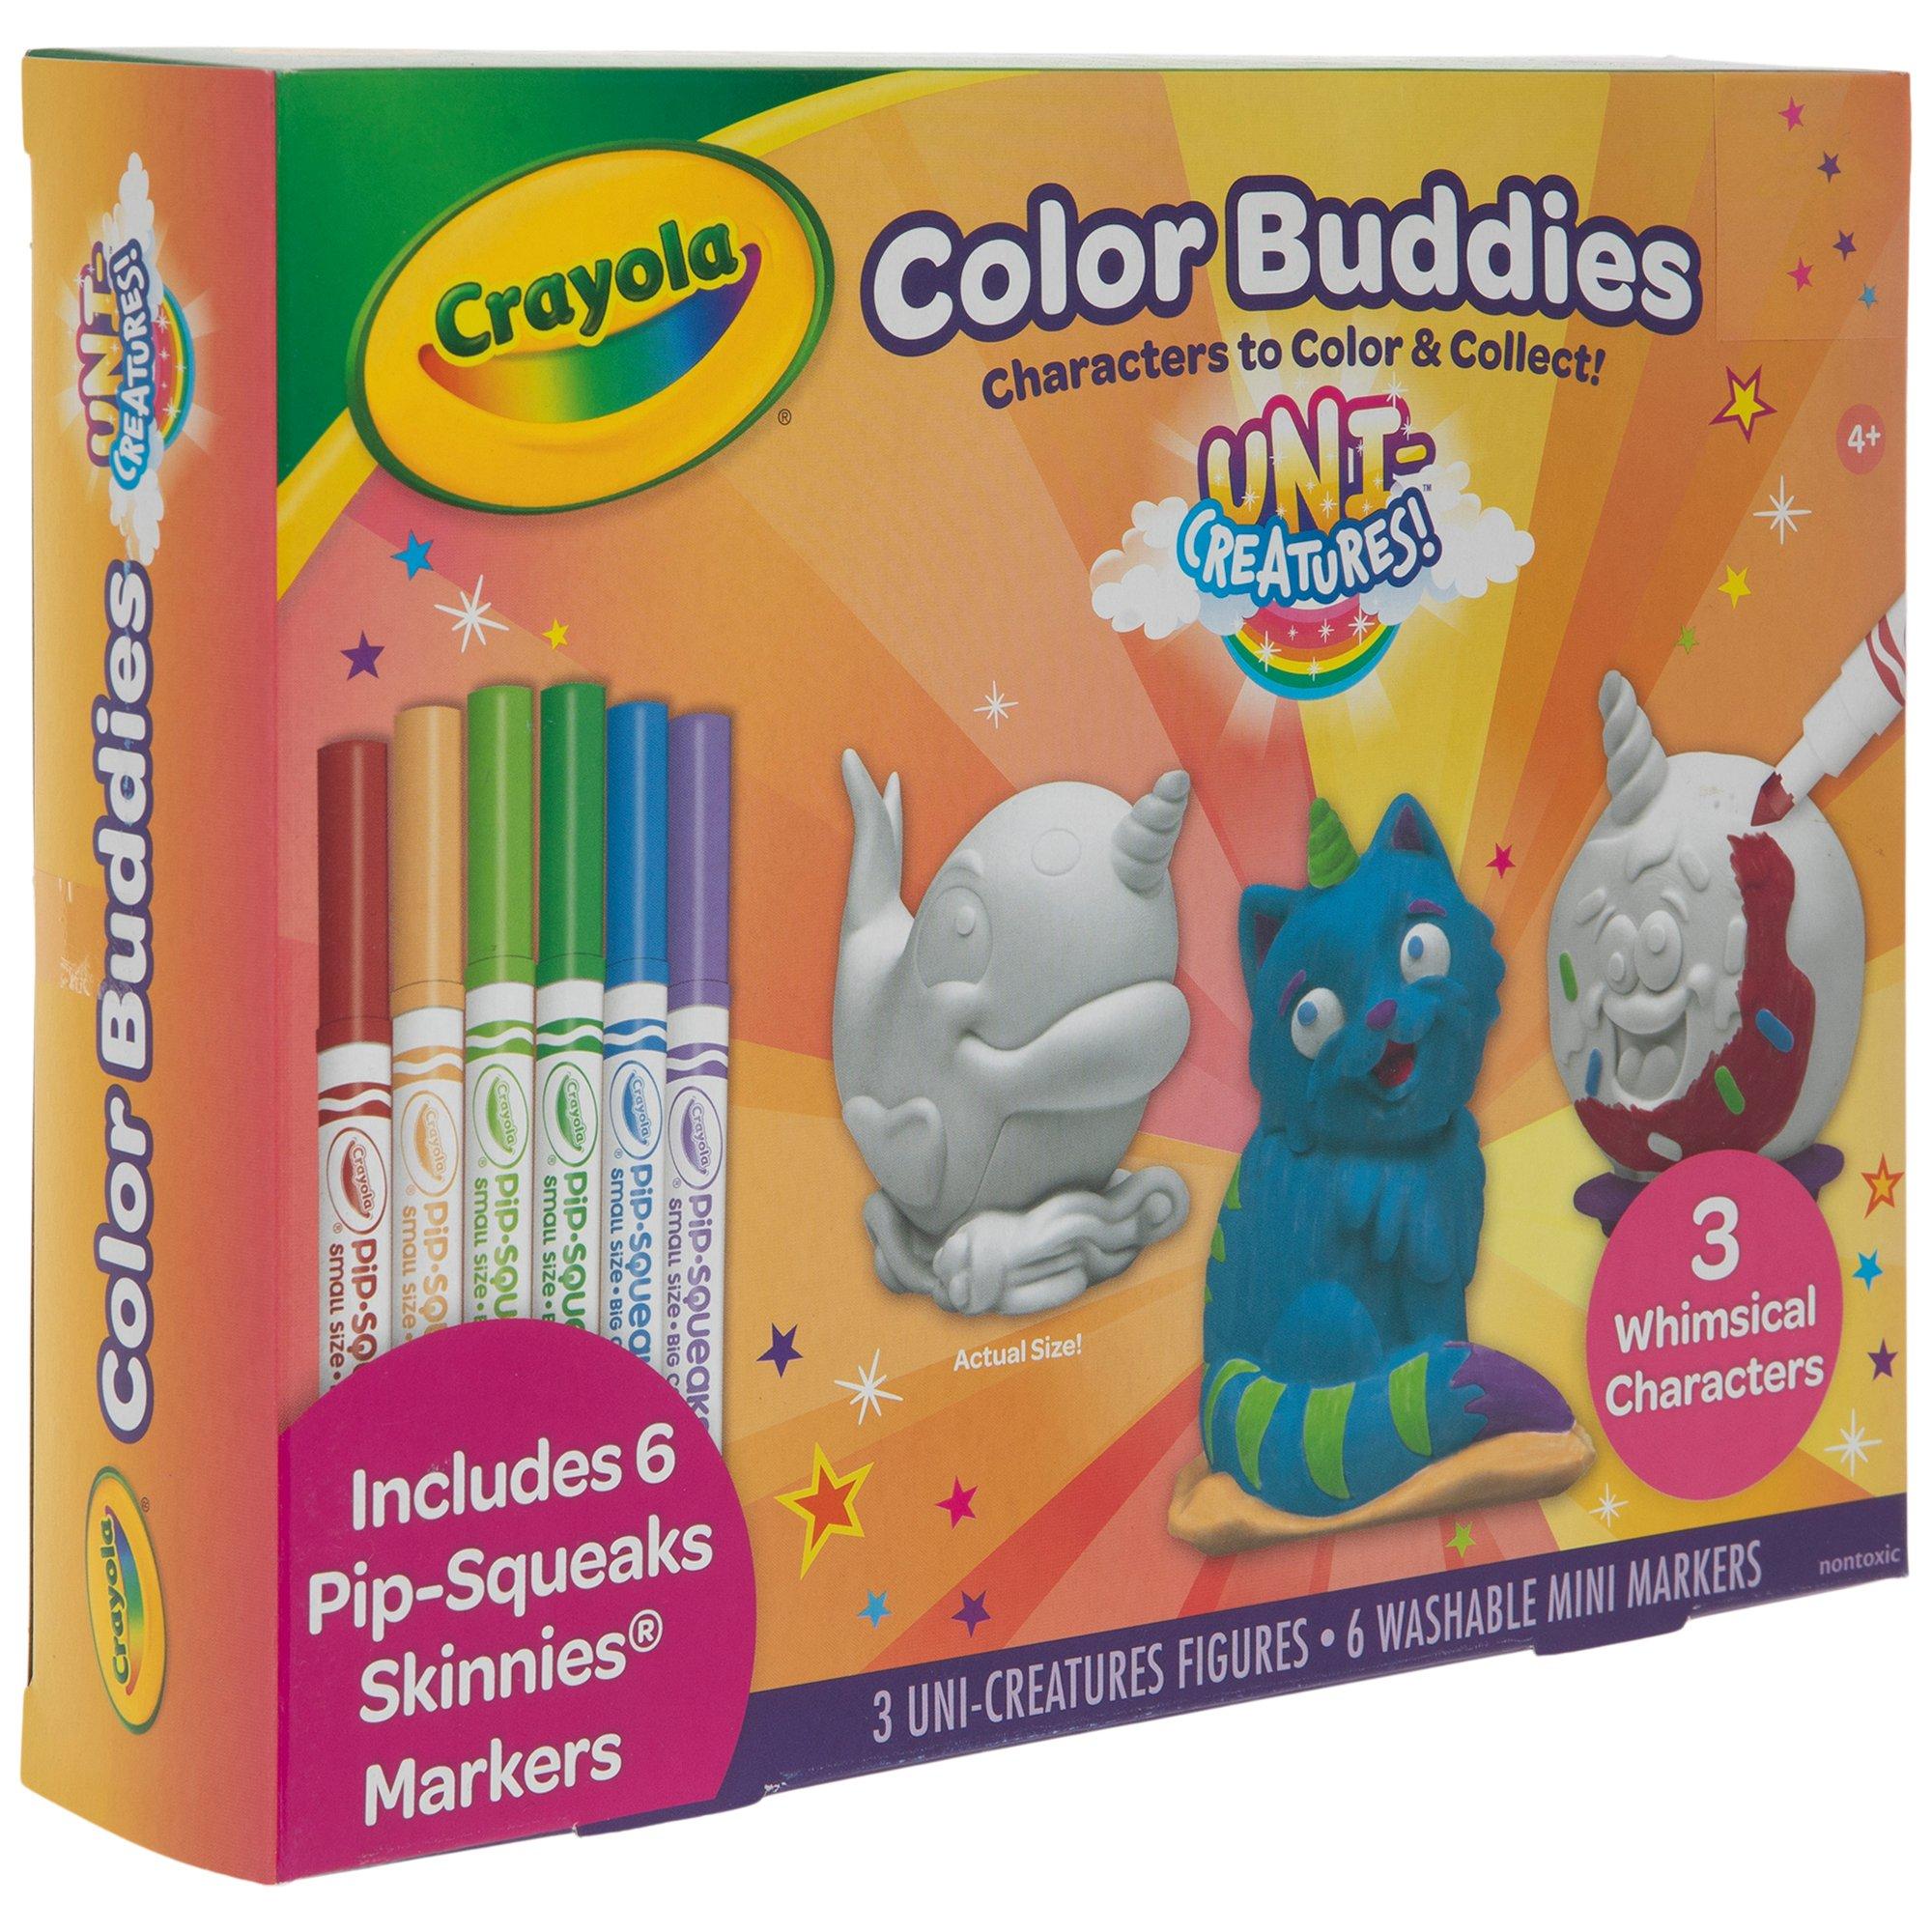 Crayola Coloring Pack with Unicreatures, 20 Mini Coloring Pages